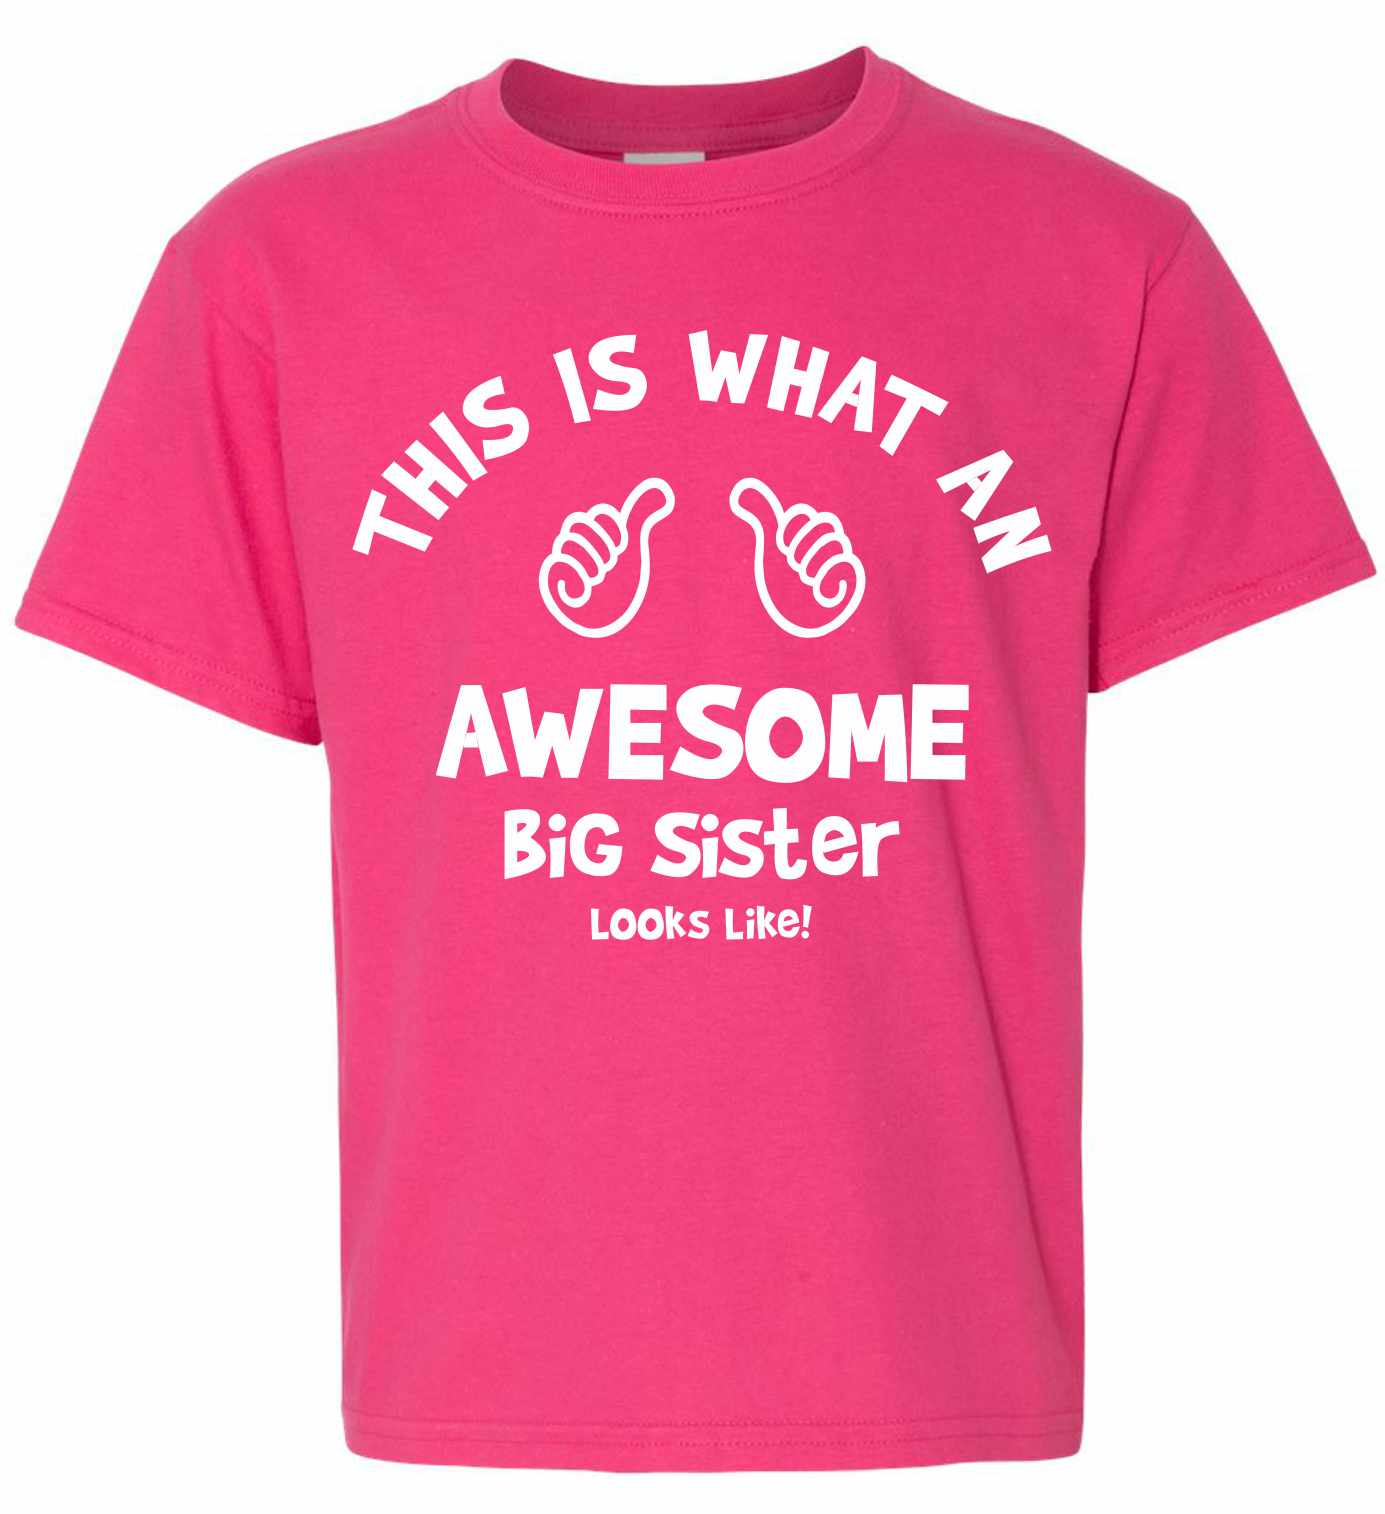 This is What an AWESOME BIG SISTER Looks Like on Kids T-Shirt (#969-201)